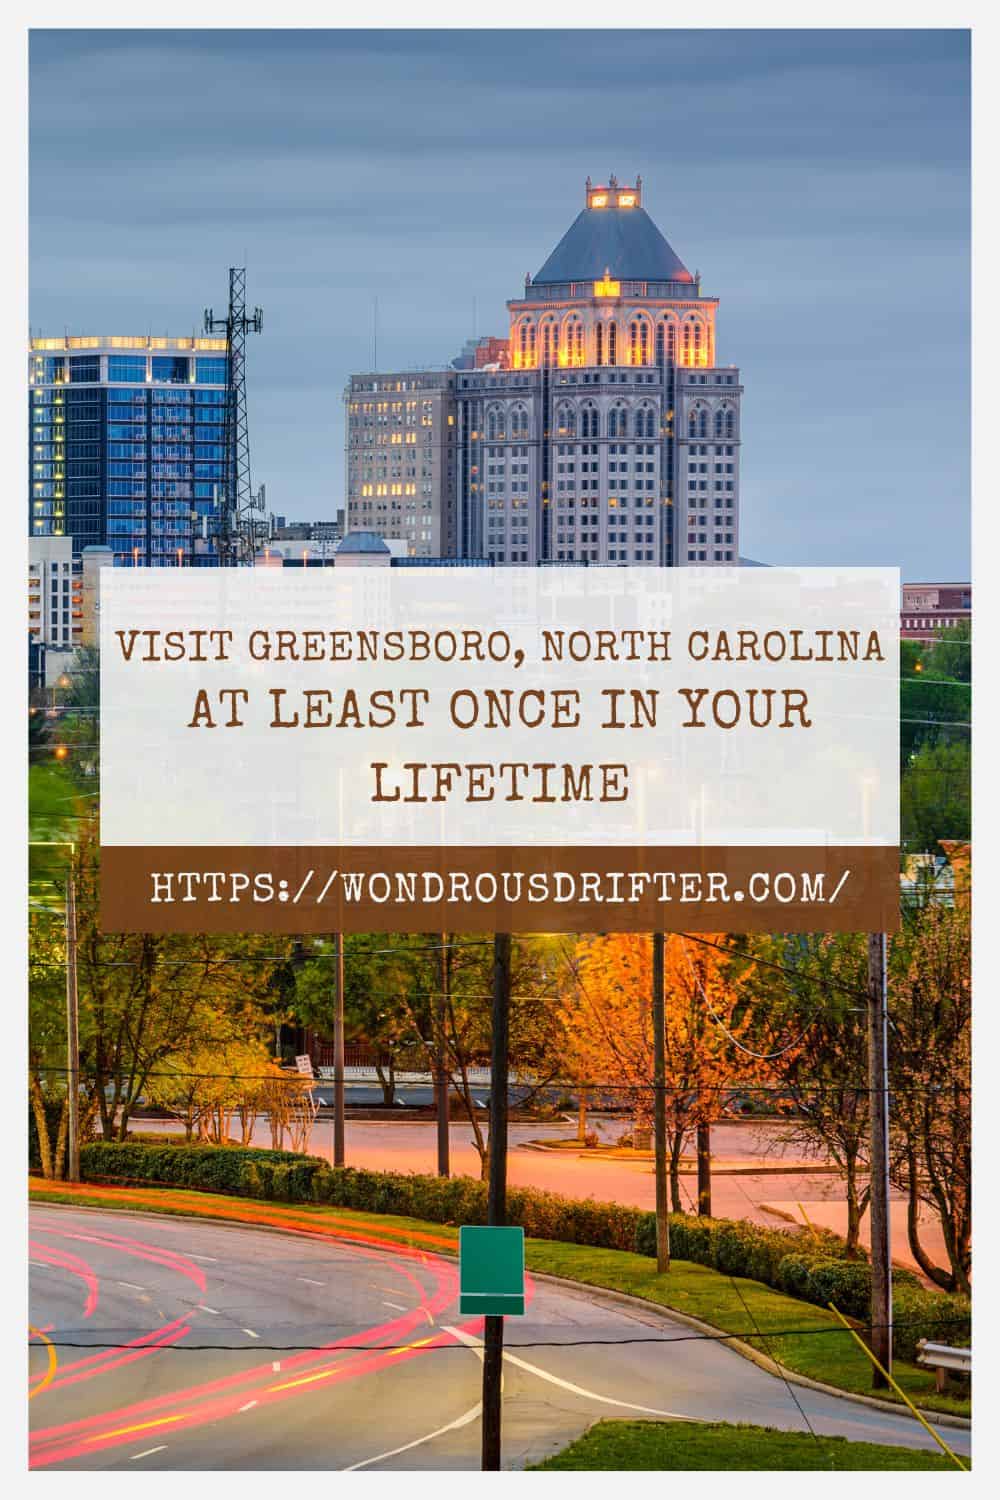 Visit Greensboro North Carolina at least one in your lifetime